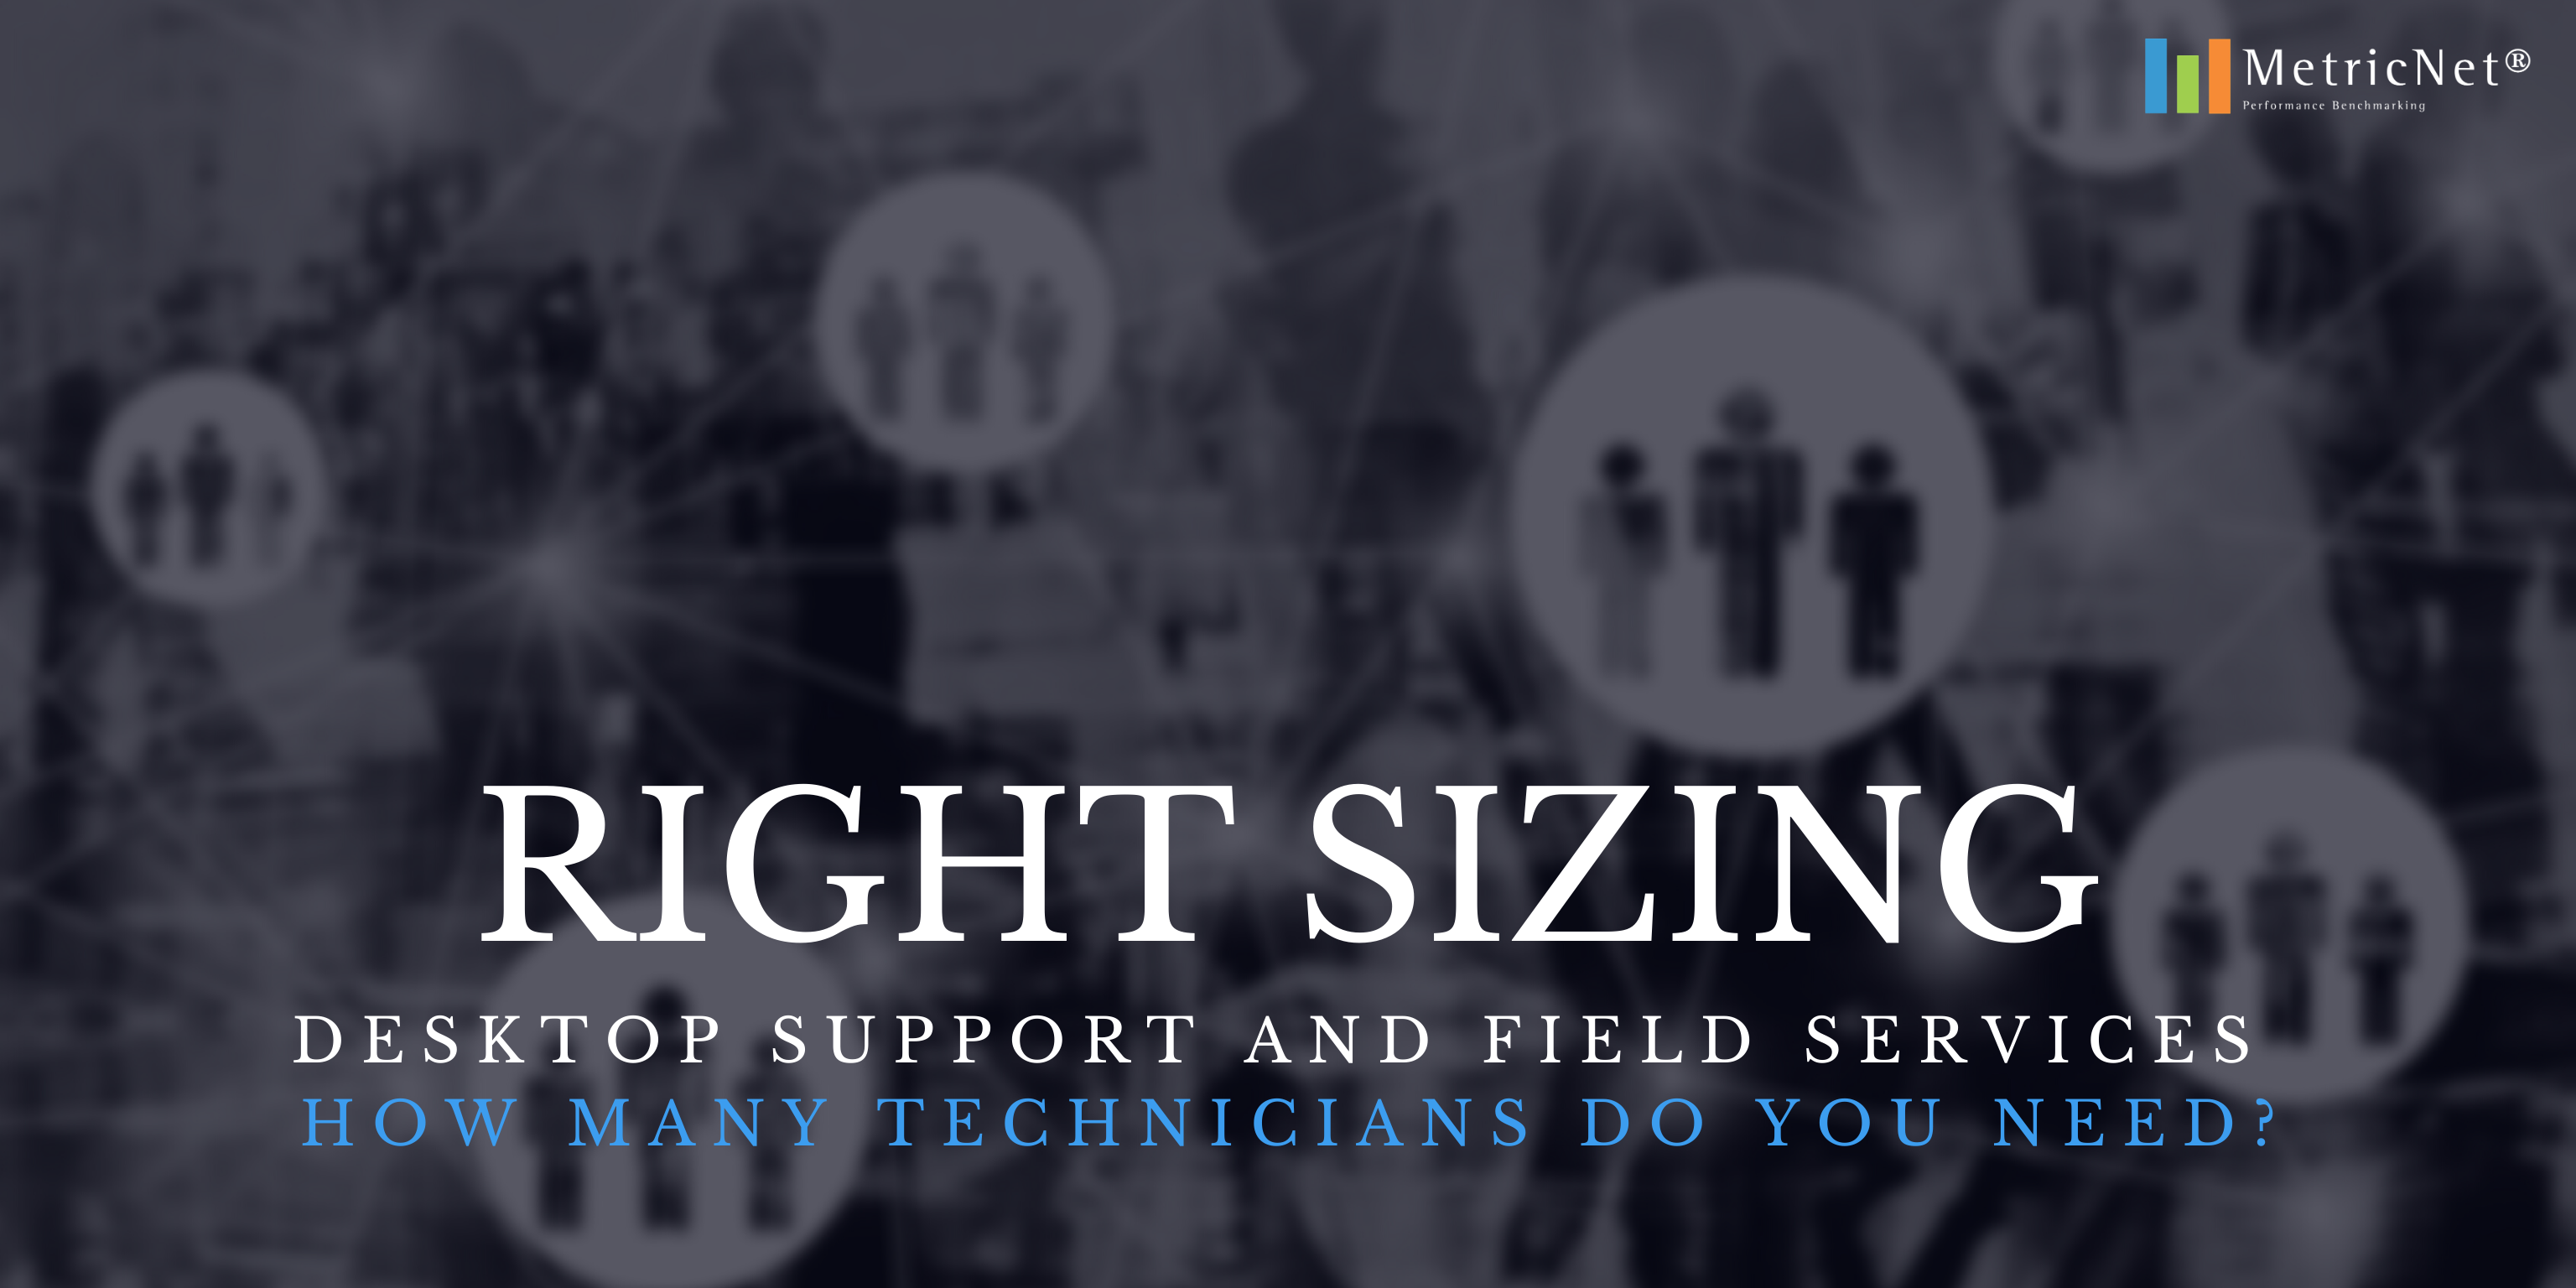 Desktop Support and Field Services Staffing Ratios | How Many Technicians do You Need?